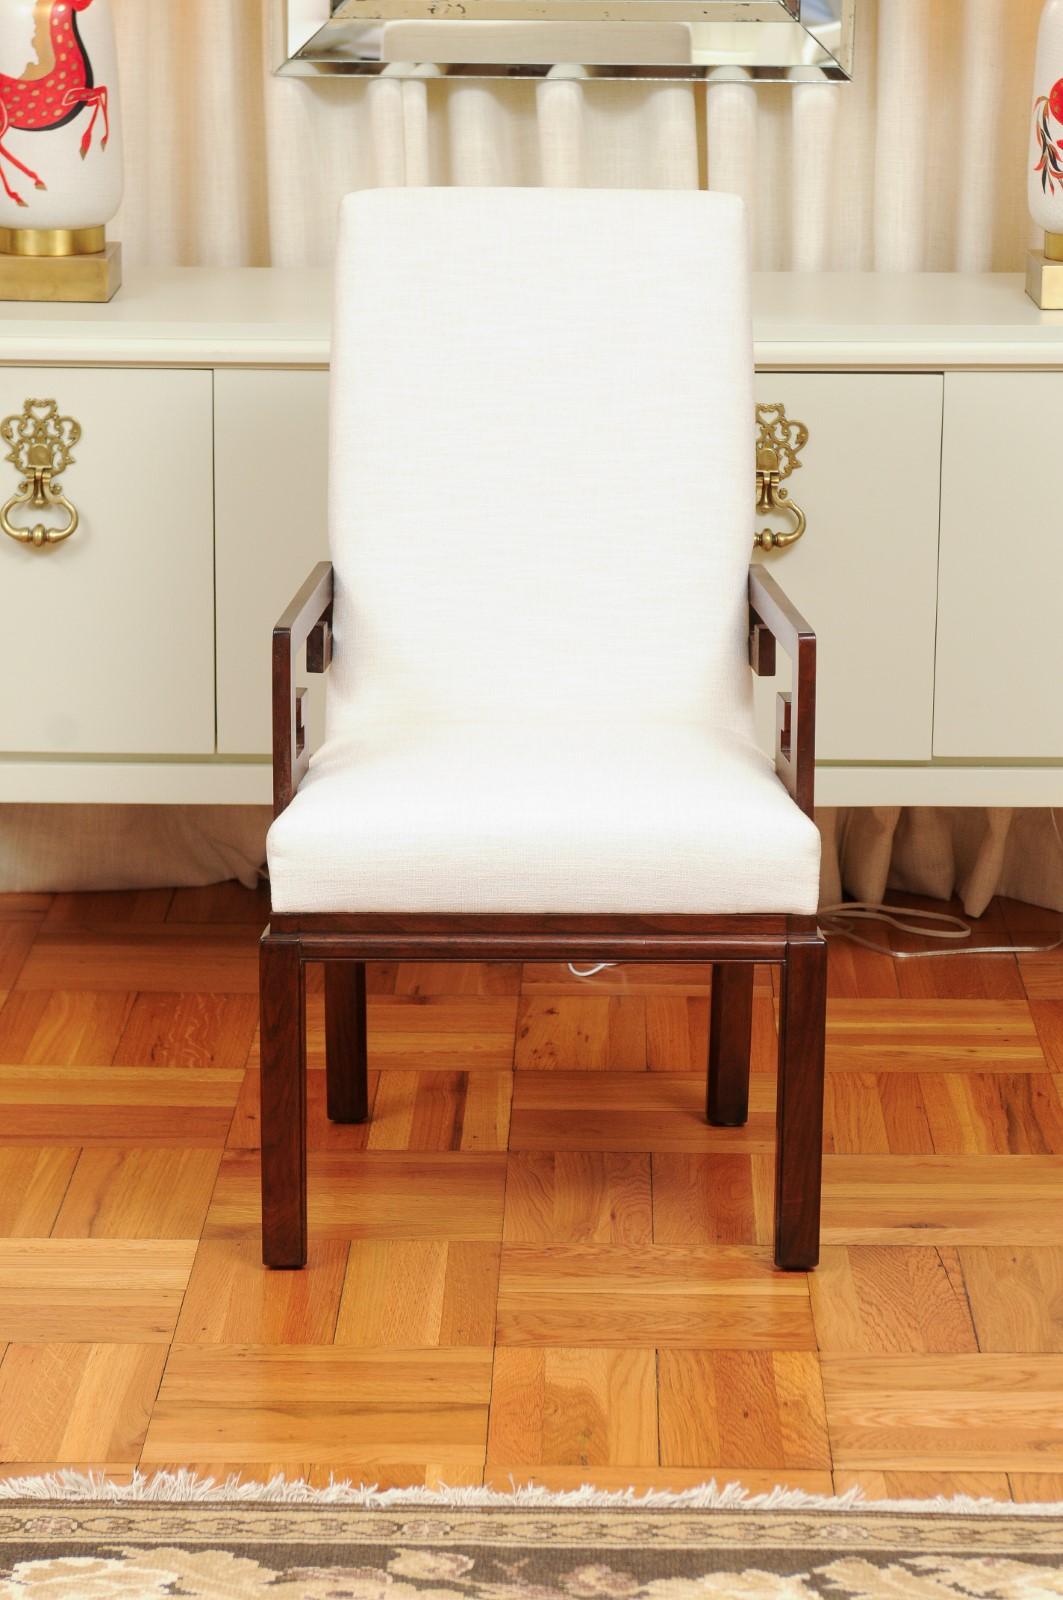 These magnificent dining chairs are shipped as professionally photographed and described in the listing narrative, completely installation ready. This All Arms set is unique on the World market. Expert custom upholstery service is available. 

An